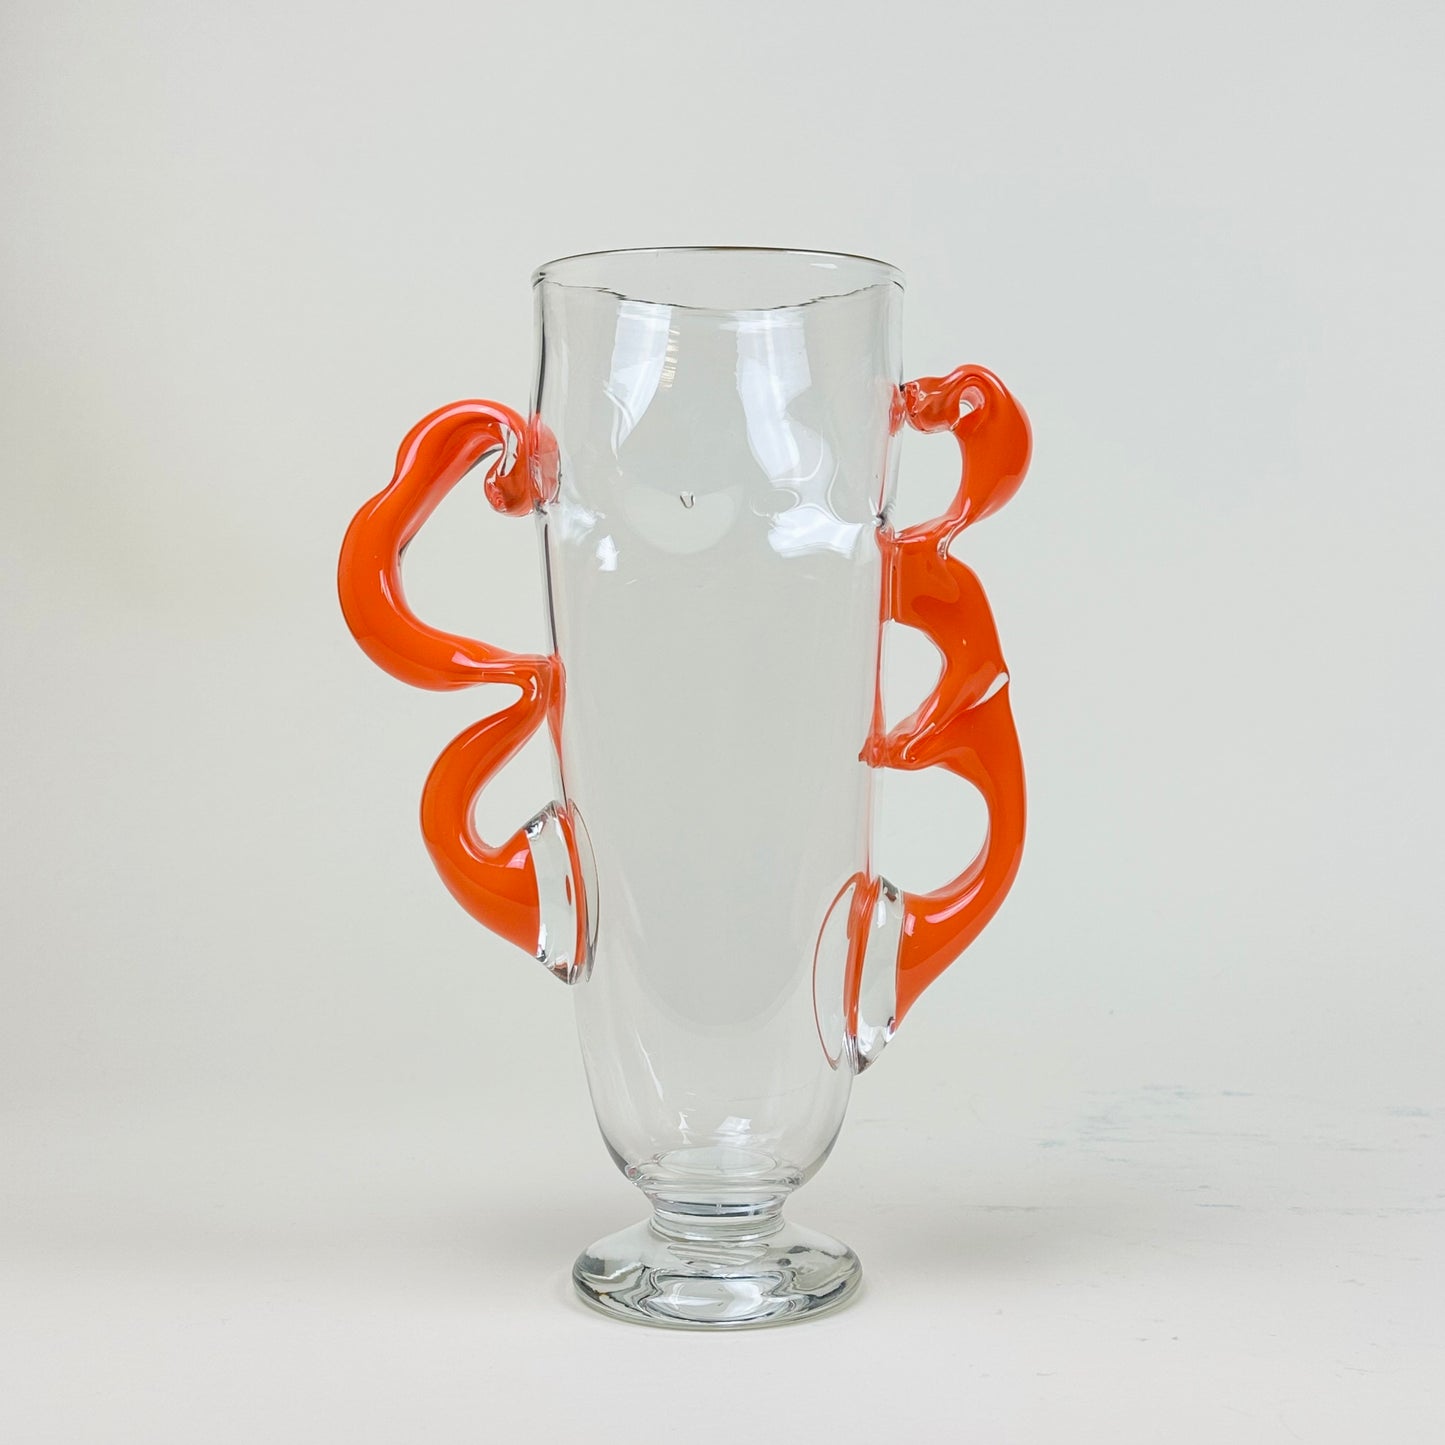 Glass vase with arms by Silje Lindrup